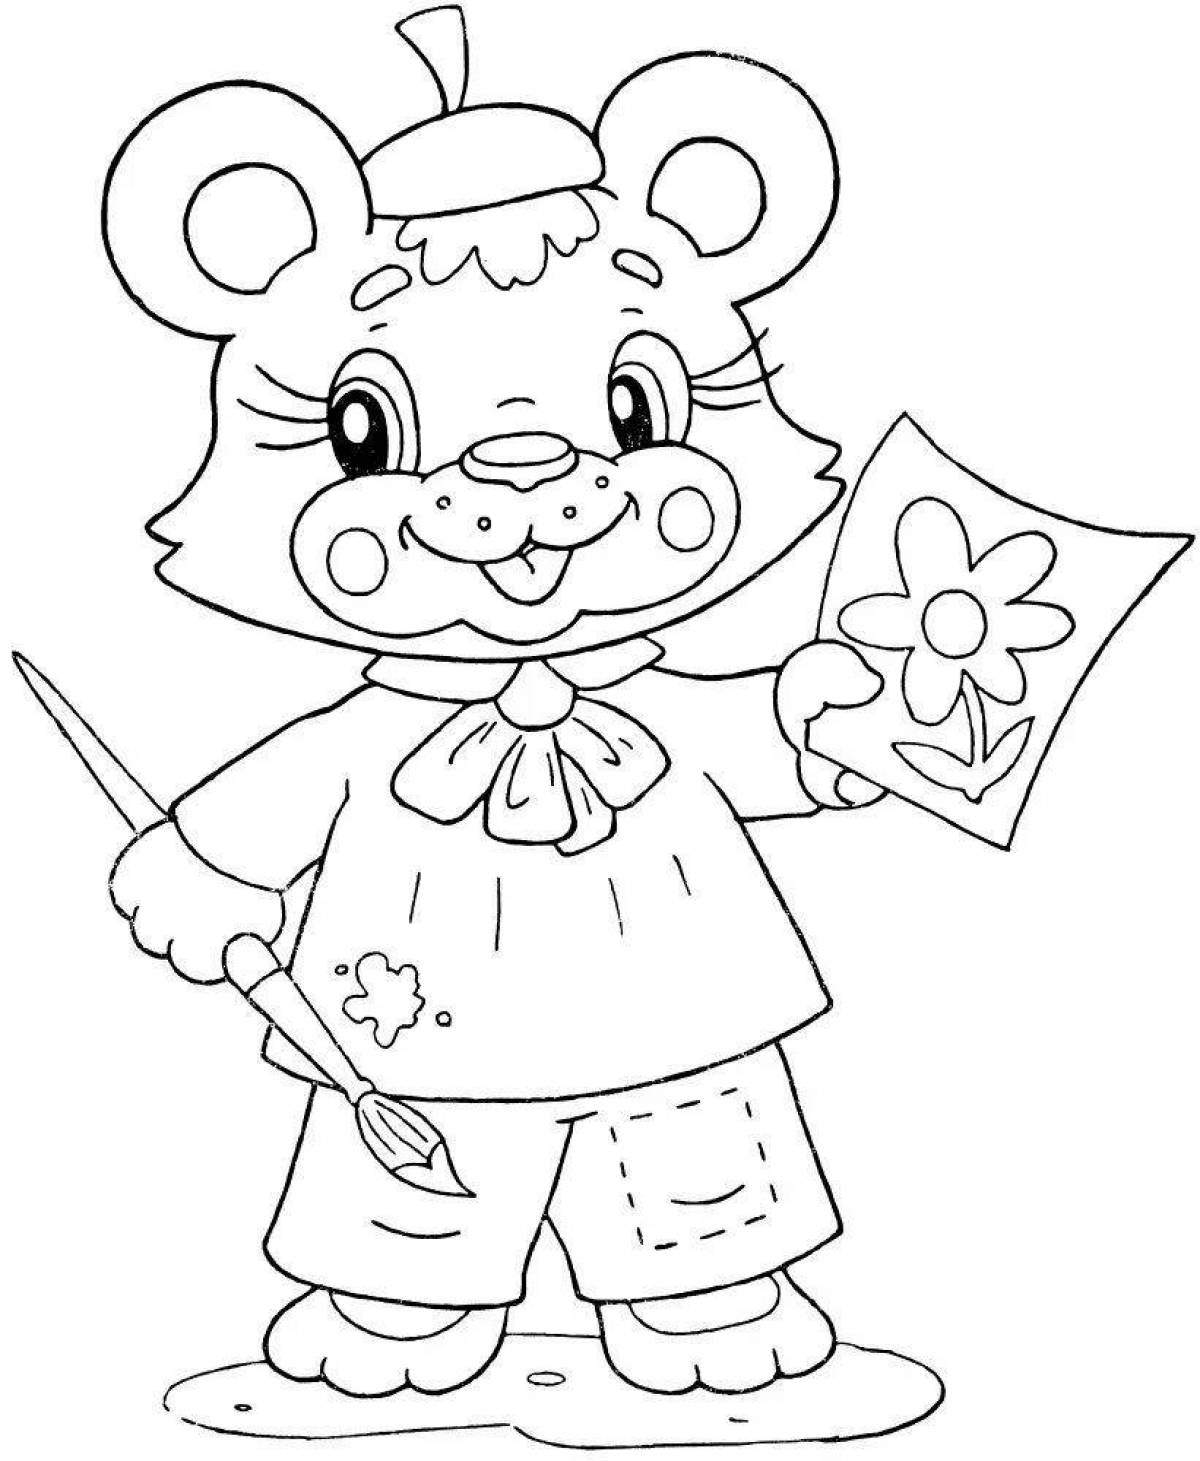 Coloring pages animals for kids